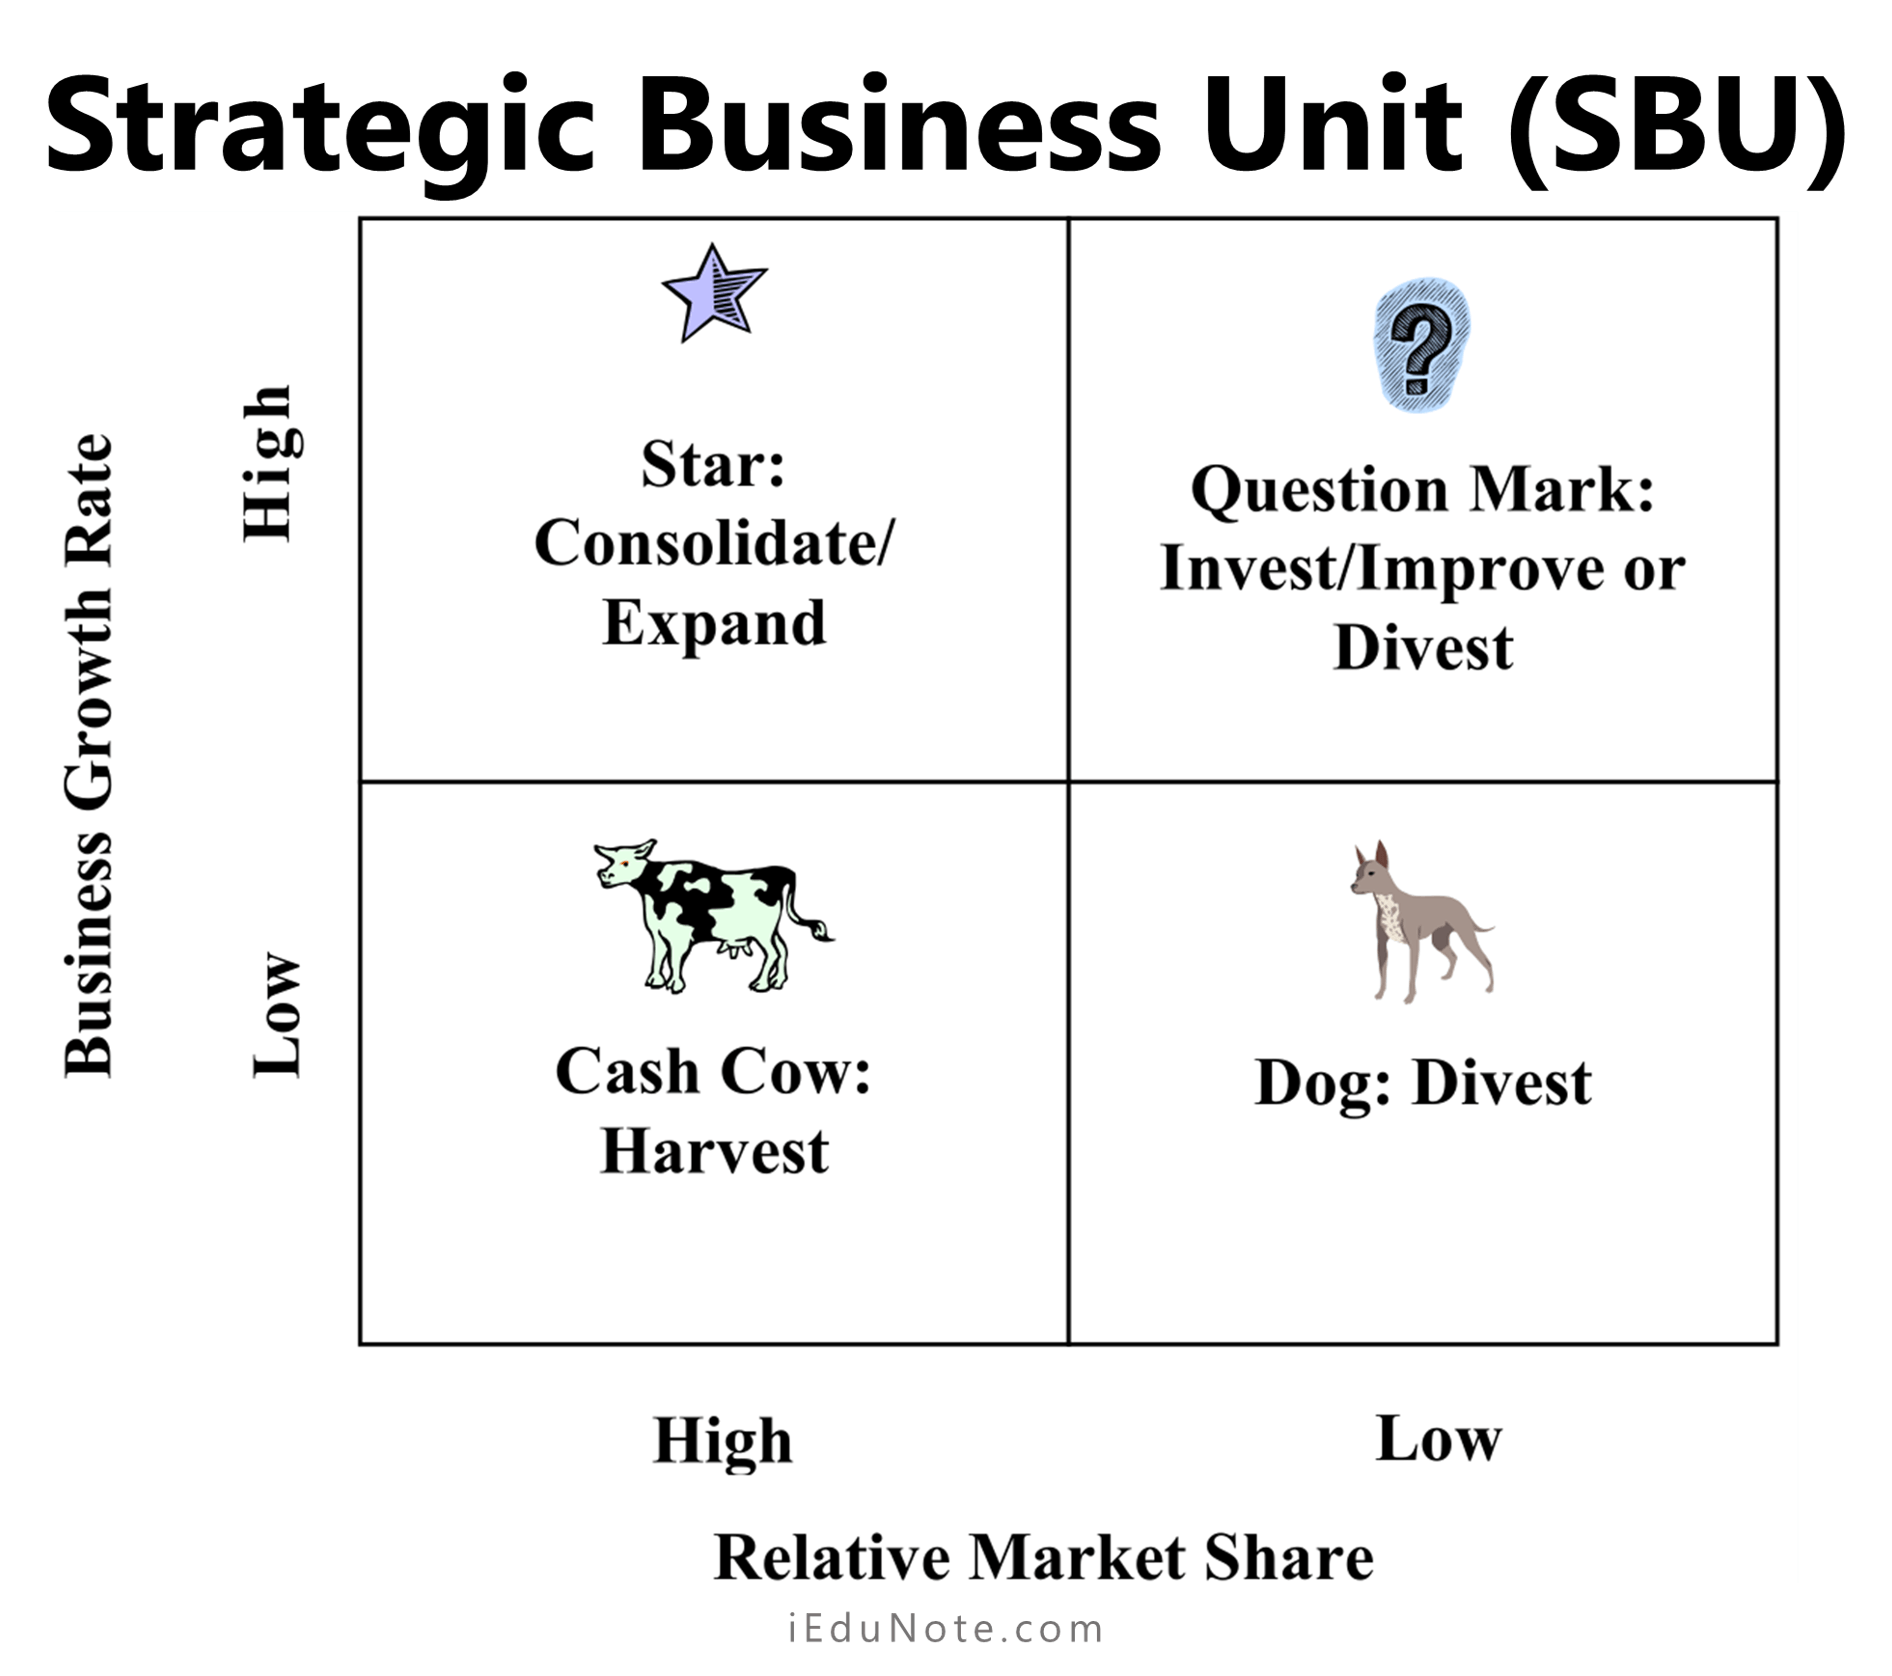 all of the following are limitations of the bcg matrix except